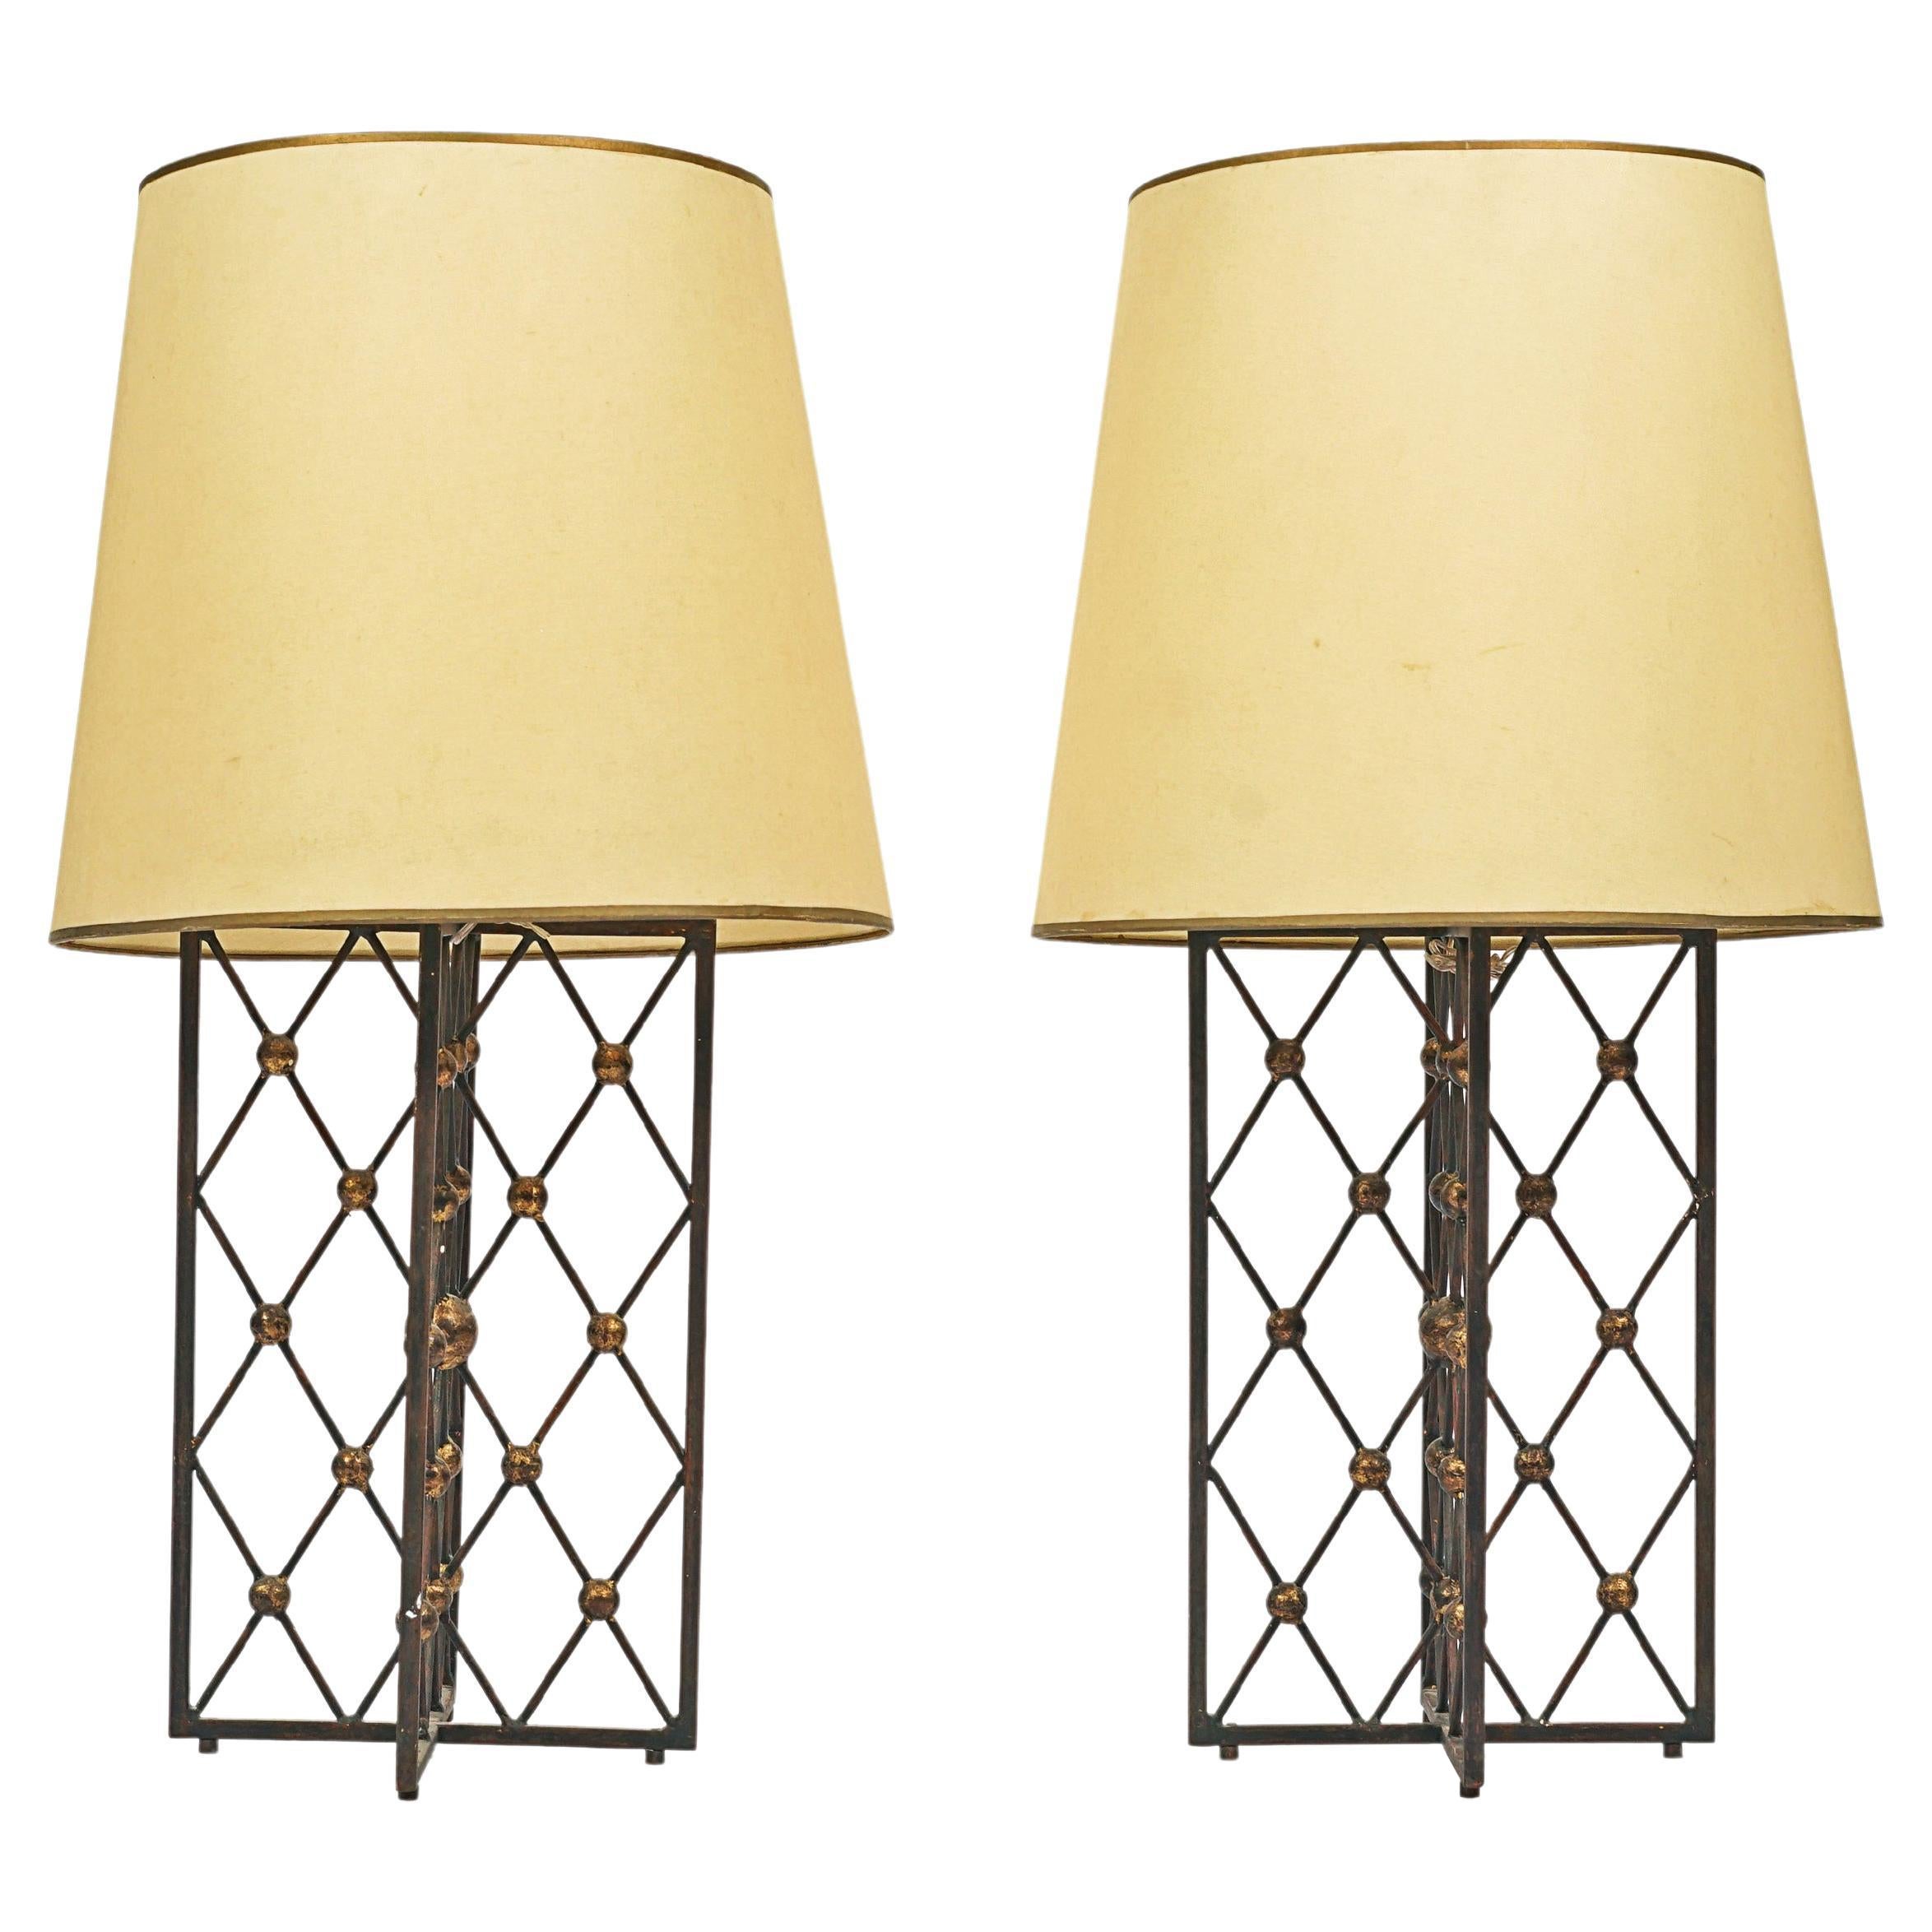 Pair of "Tour Eiffel" Table Lamps For Sale